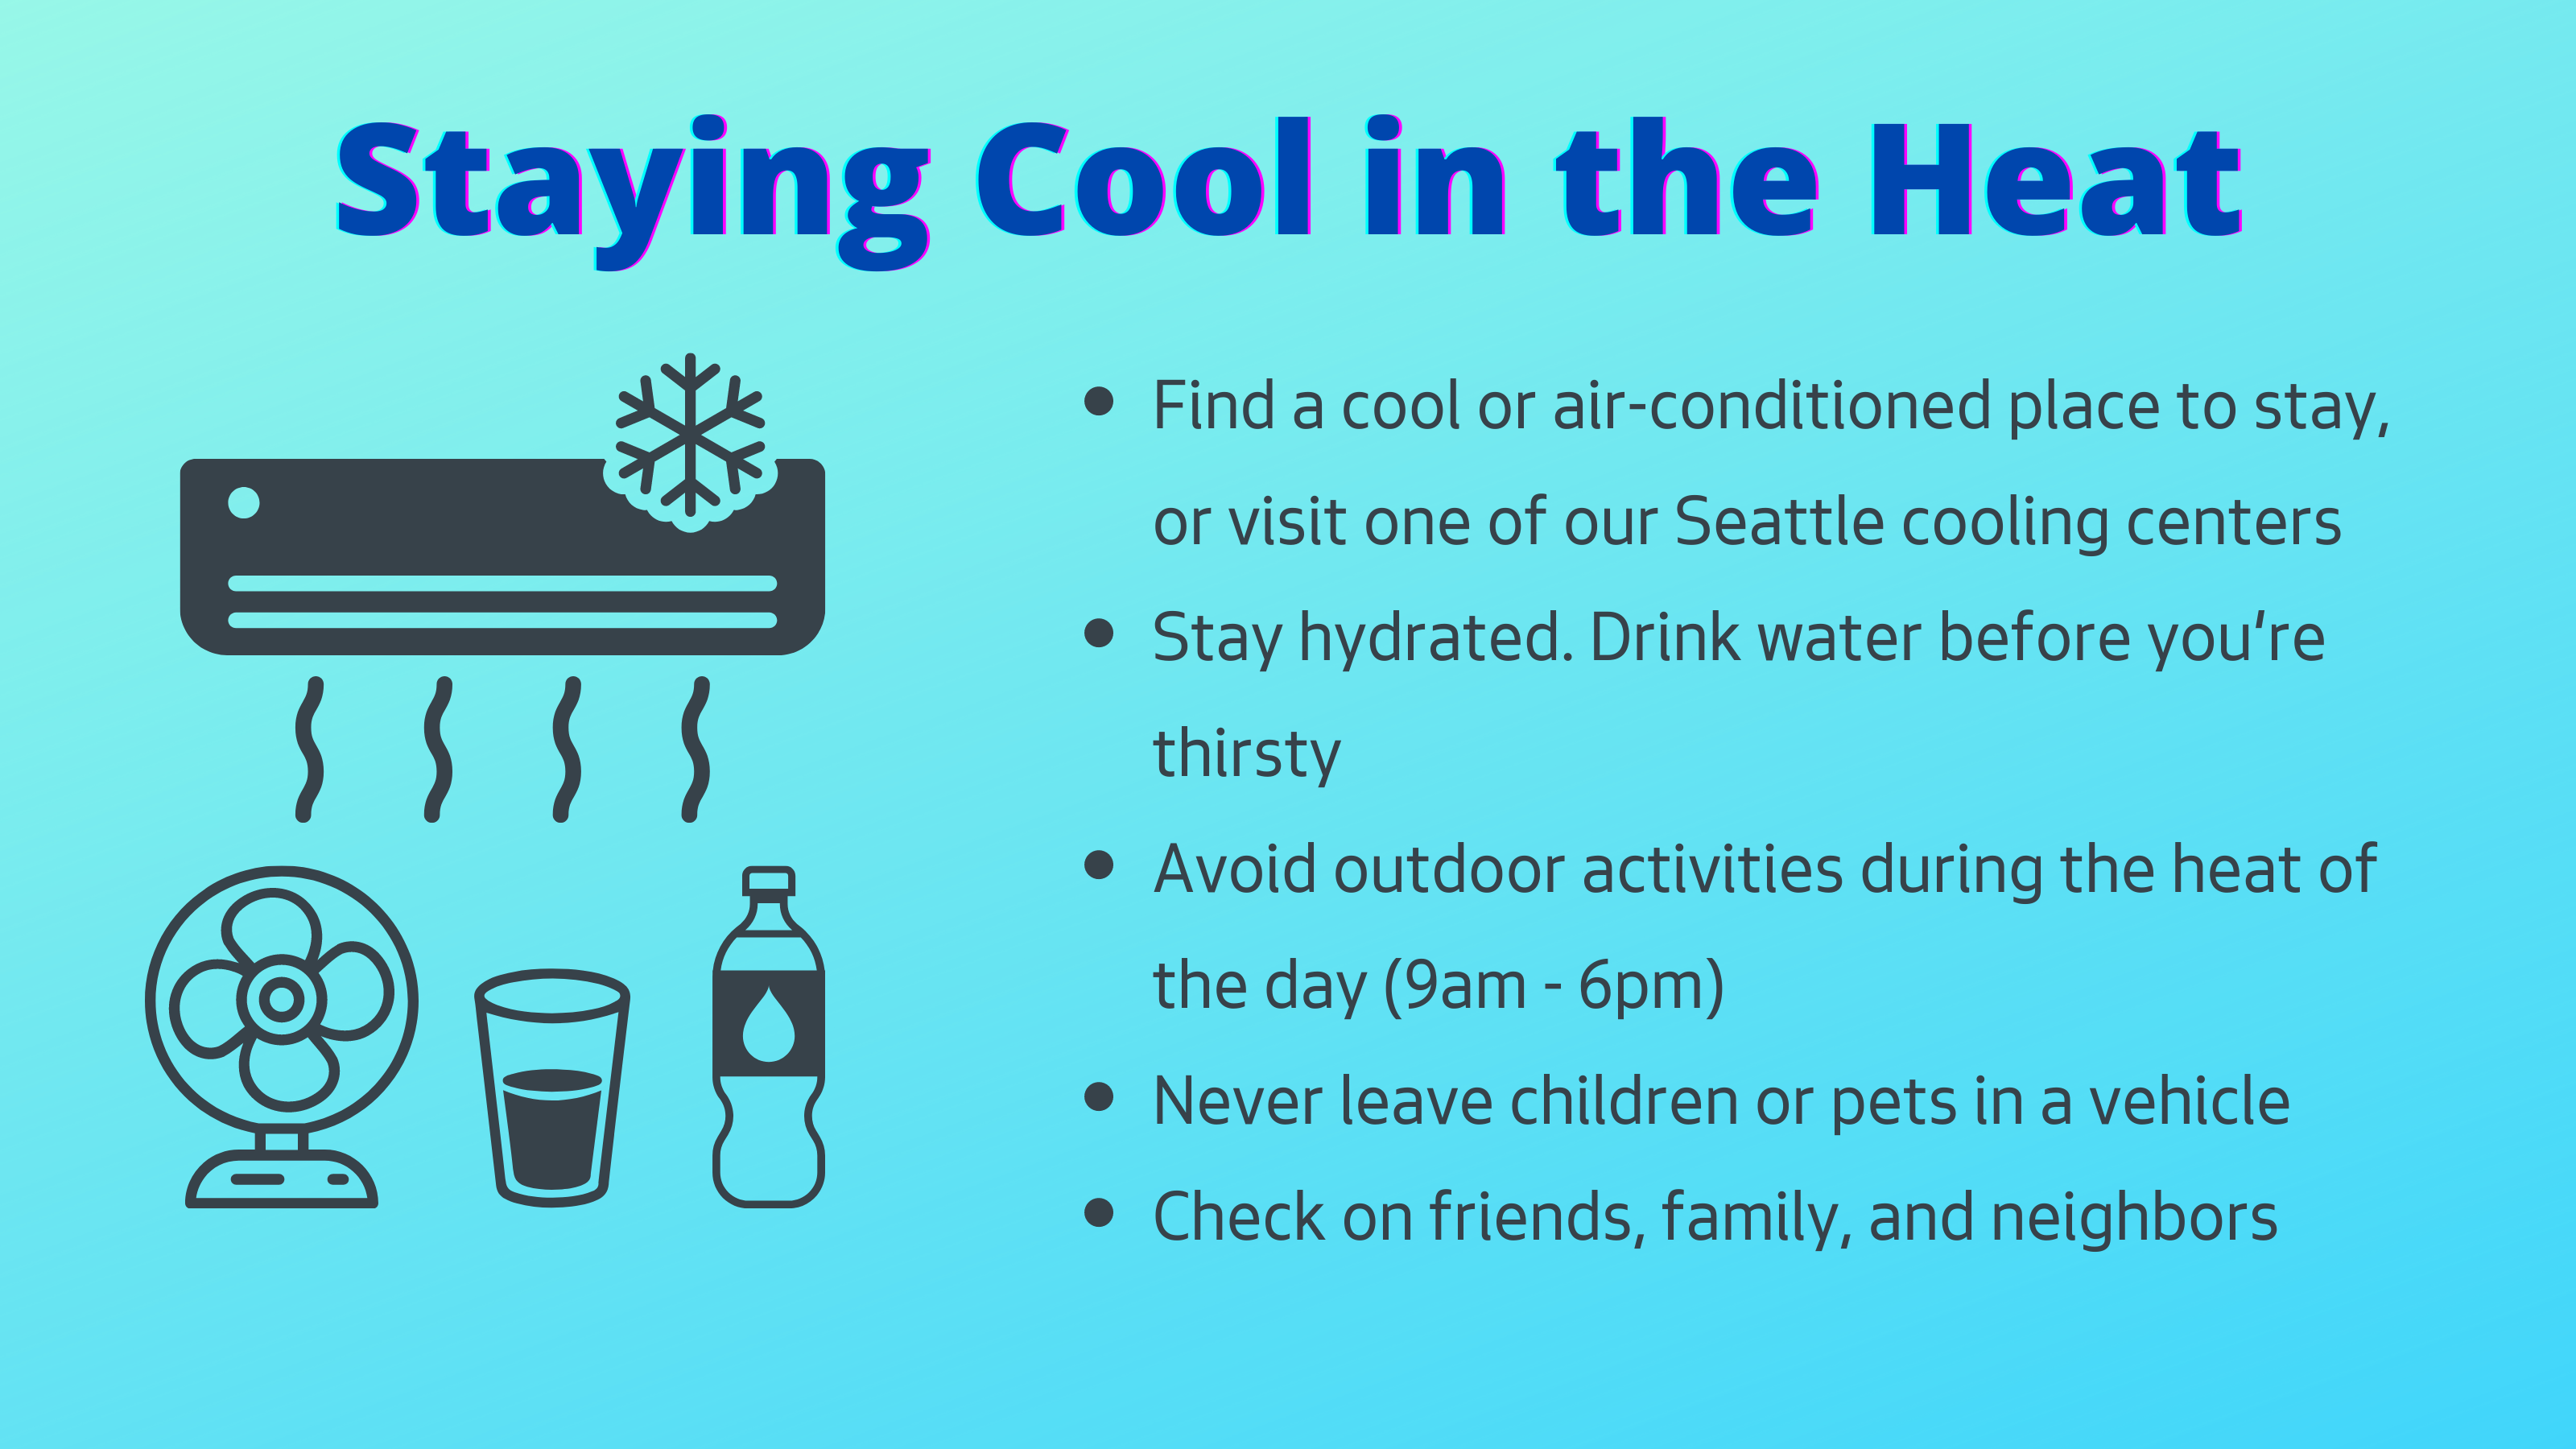 How to stay cool in the heat: Find a cool or air-conditioned place to stay, or visit one of our Seattle cooling centers. Stay hydrated. Drink water before you're thirsty. Avoid outdoor activities during the heat of the day (10am - 4pm). Never leave children or pets in a vehicle. Check on friends, family, and neighbors.